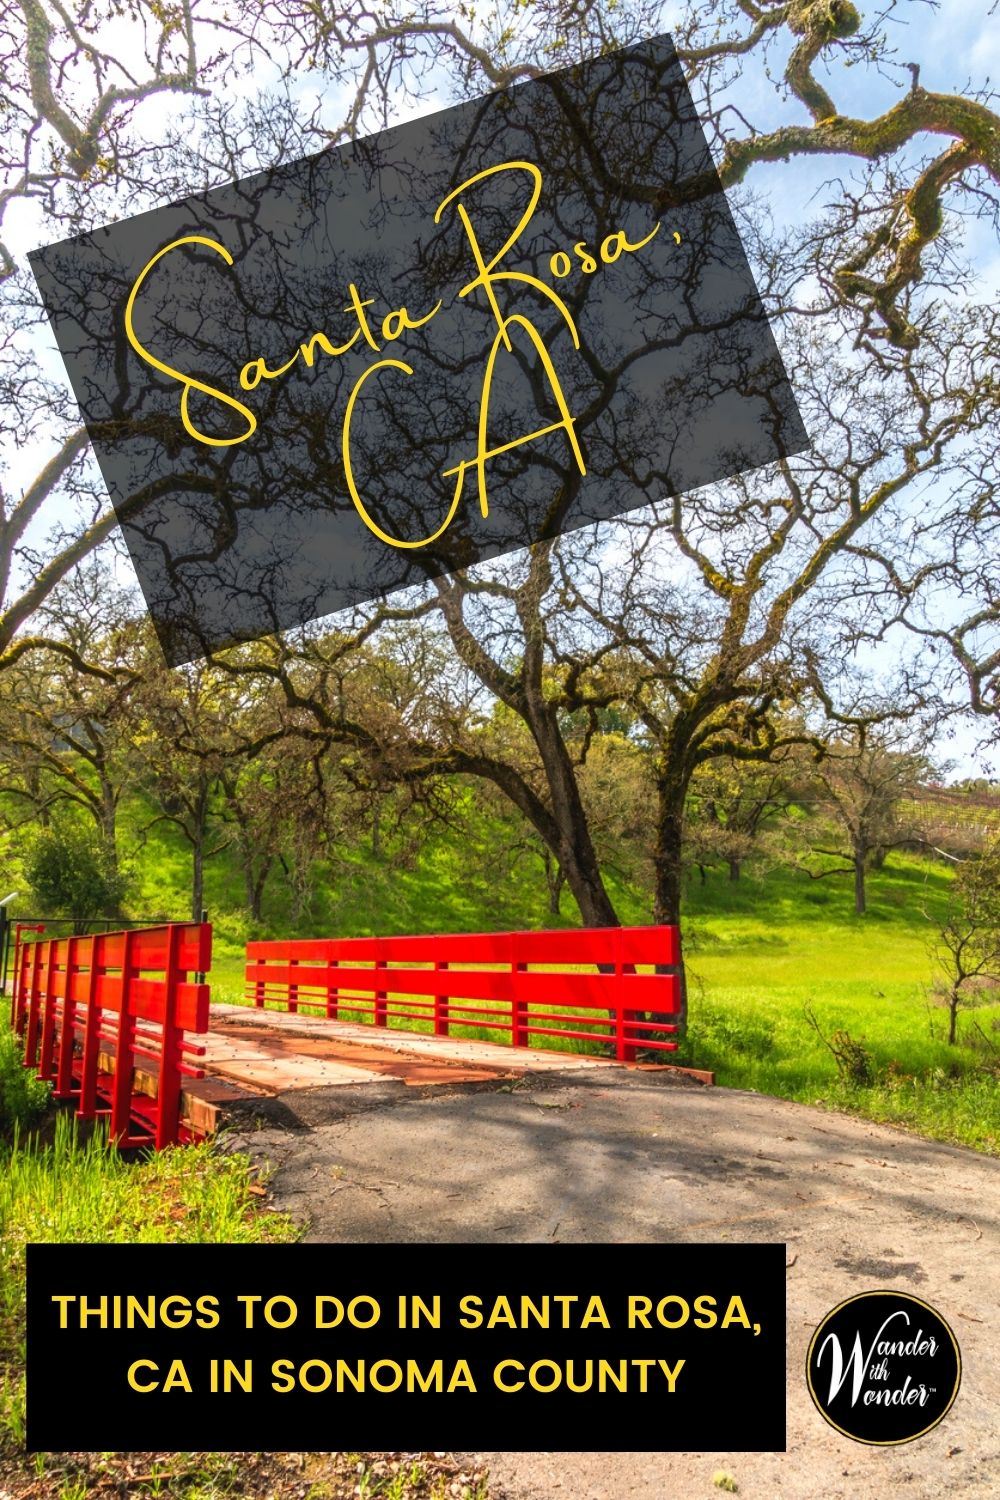 Discover some of the best things to do in Santa Rosa, CA. Forty-five minutes from the Golden Gate Bridge, Santa Rosa welcomes visitors with open arms.